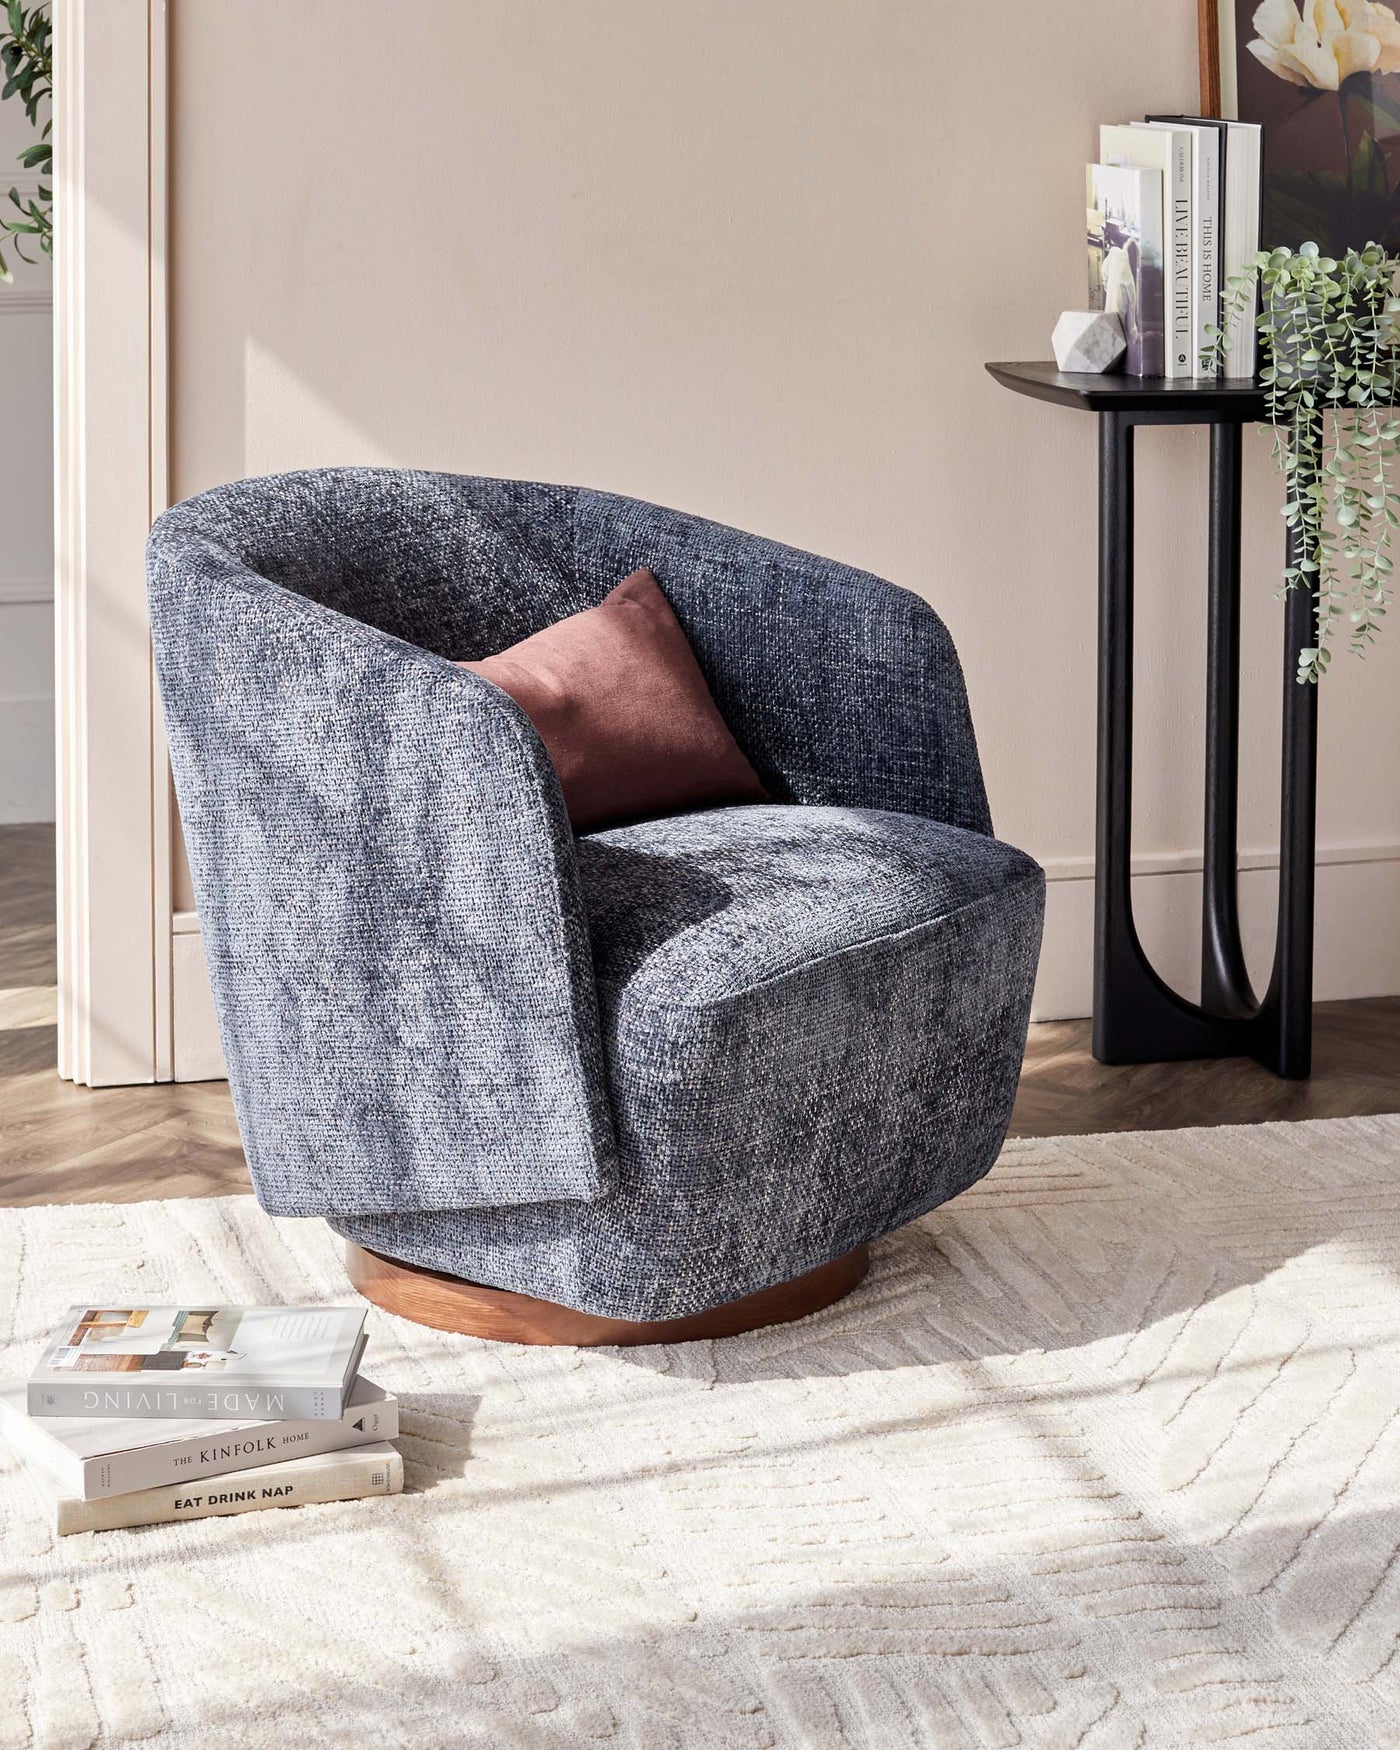 A contemporary-styled, round barrel armchair with textured dark blue upholstery and a single plush, rose-coloured cushion. The chair features a low-profile, wooden circular base. Positioned to its right, a slim, tall, round side table in matte black holds an array of books and decorative items, set against a neutral-toned cosy rug and a light-coloured wall.